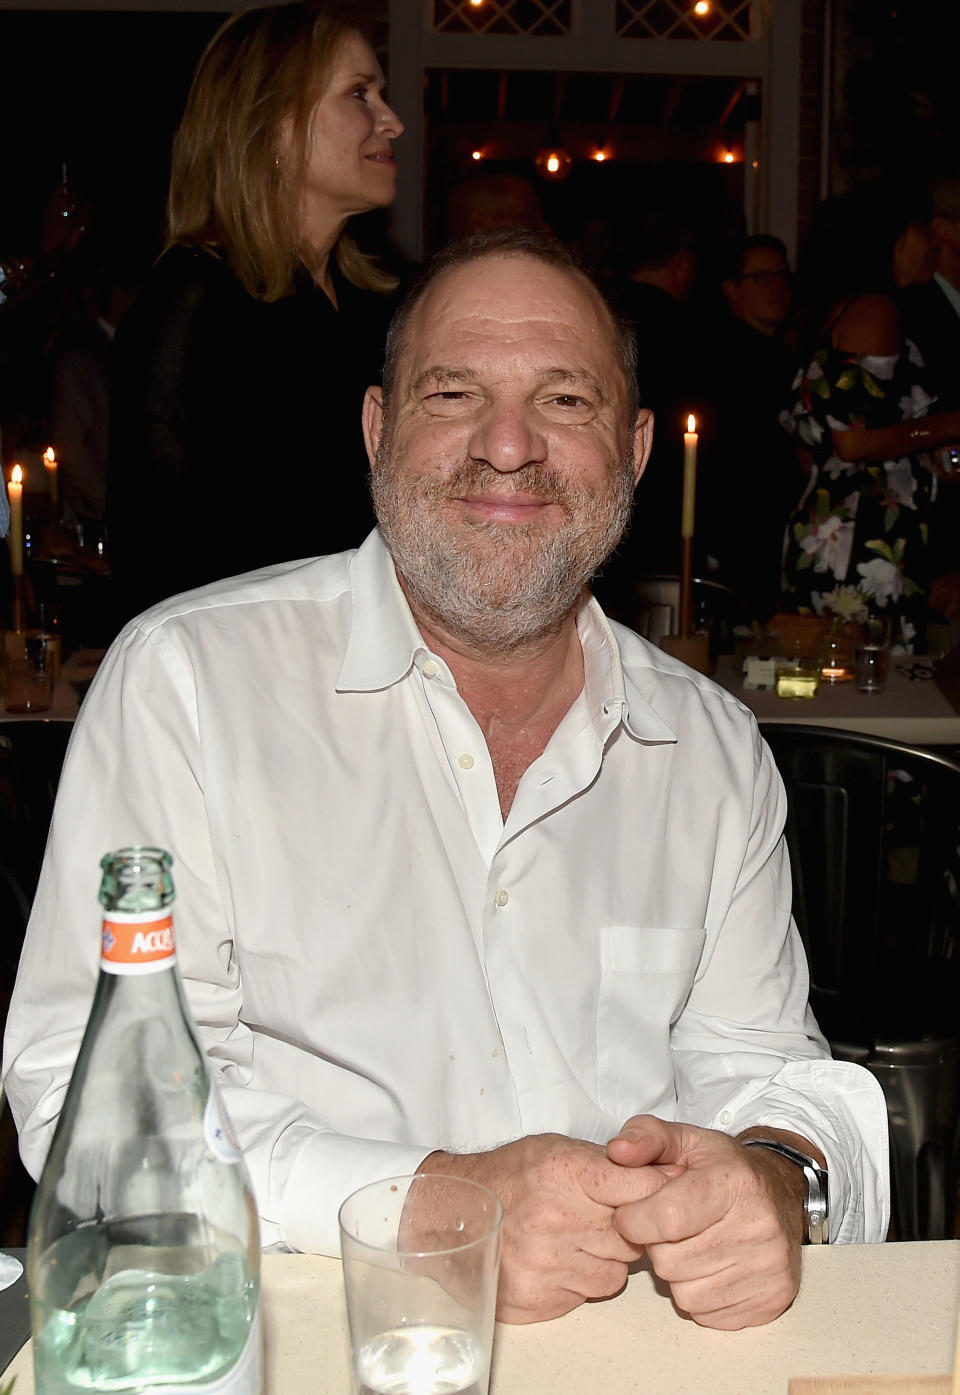 The #MeToo movement grew after film executive Harvey Weinstein was accused of sexual misconduct. (Photo: Patrick McMullan via Getty Images)